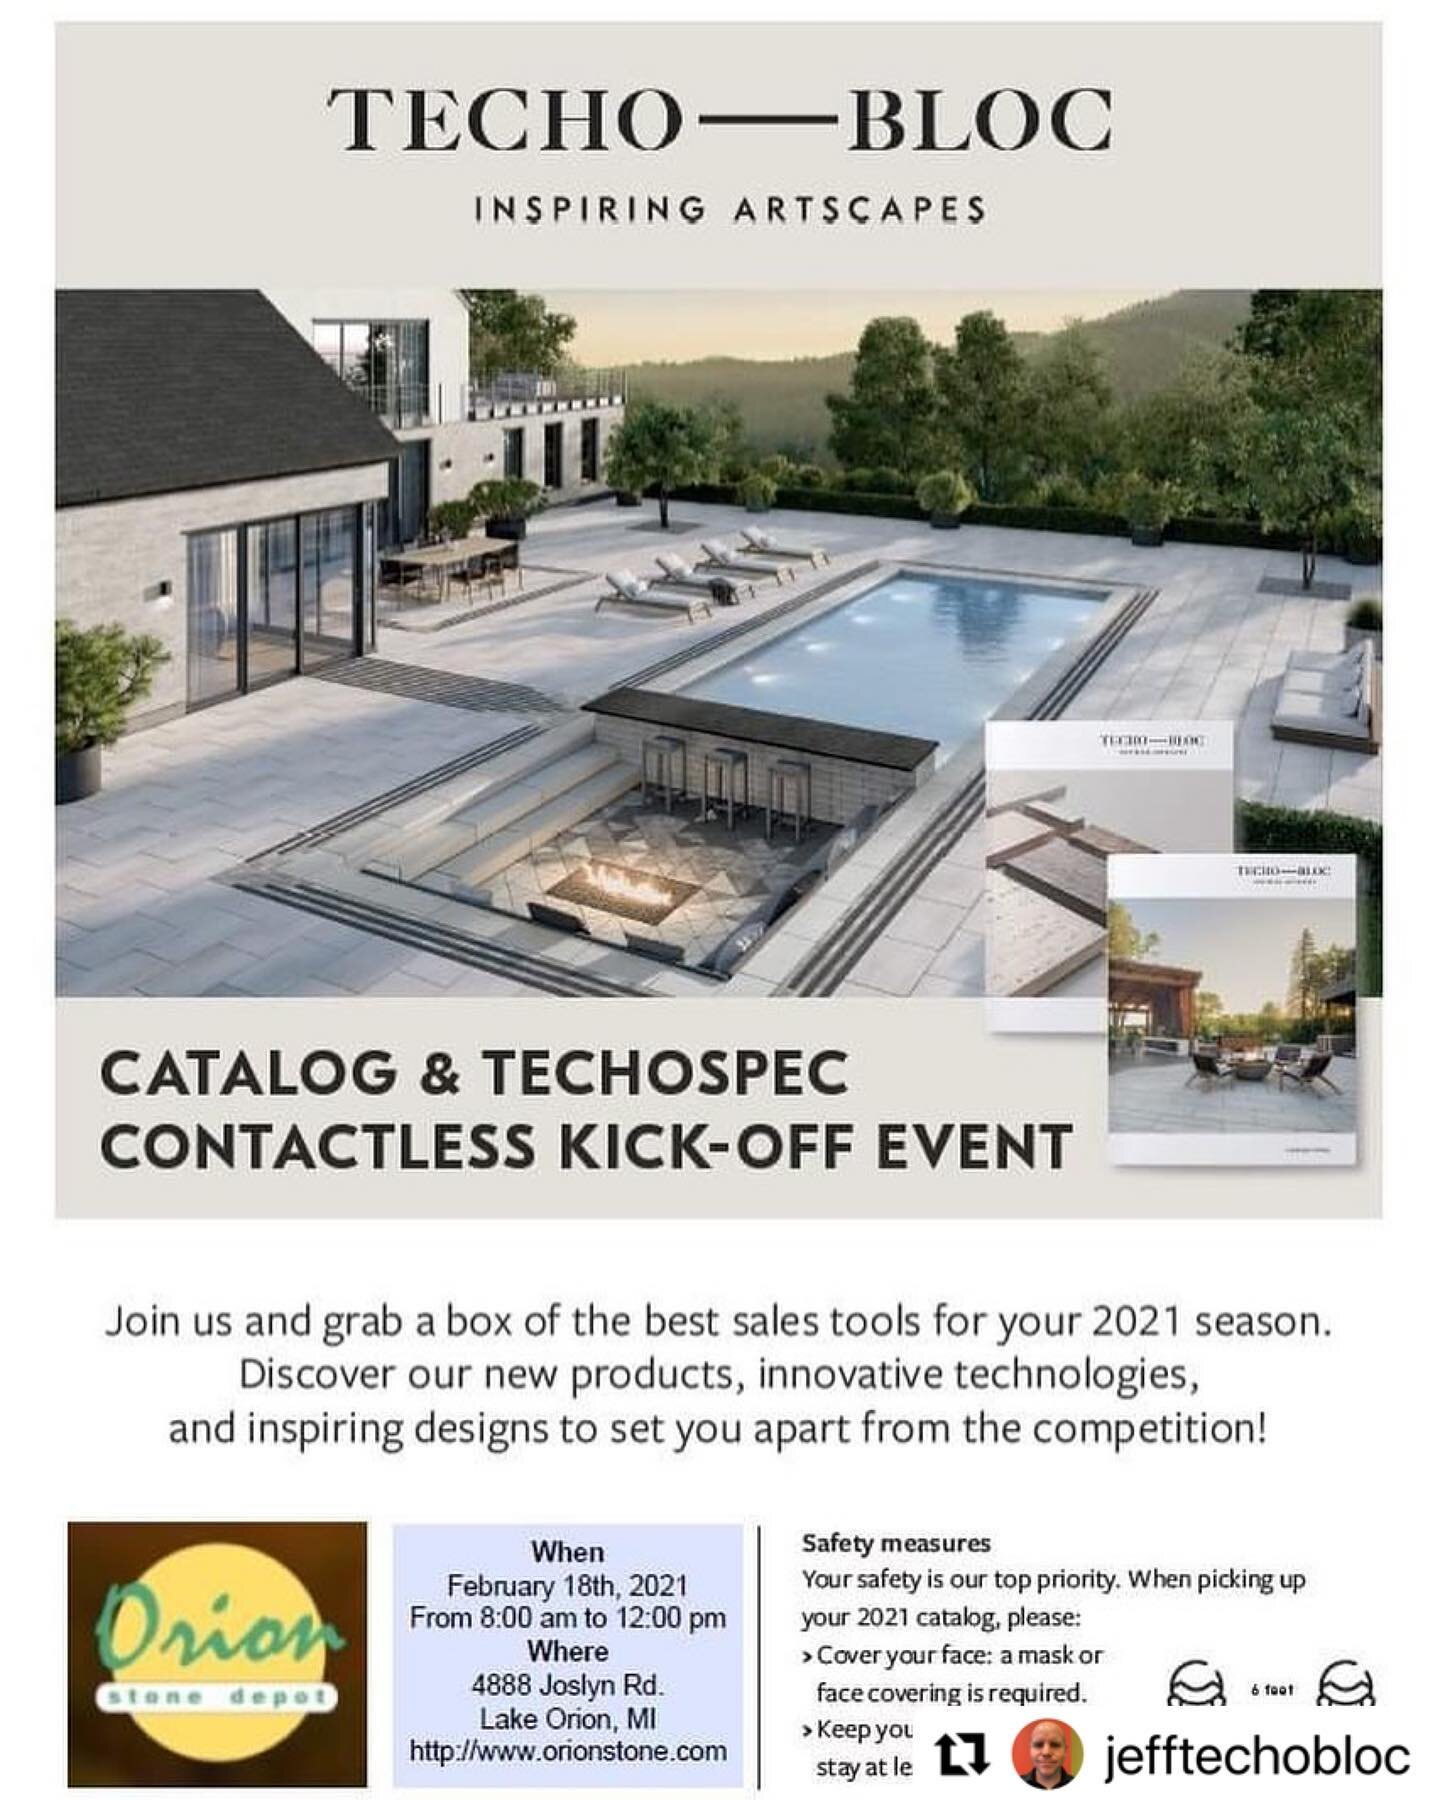 BIG NEWS!!! Next Thursday, February 18th, 2021 @jefftechobloc will be in store for the @techobloc 2021 Kick-Off Event. Come visit to see all the new things they have in store for  a fantastic 2021 season! 

No reservations required. Social distancing